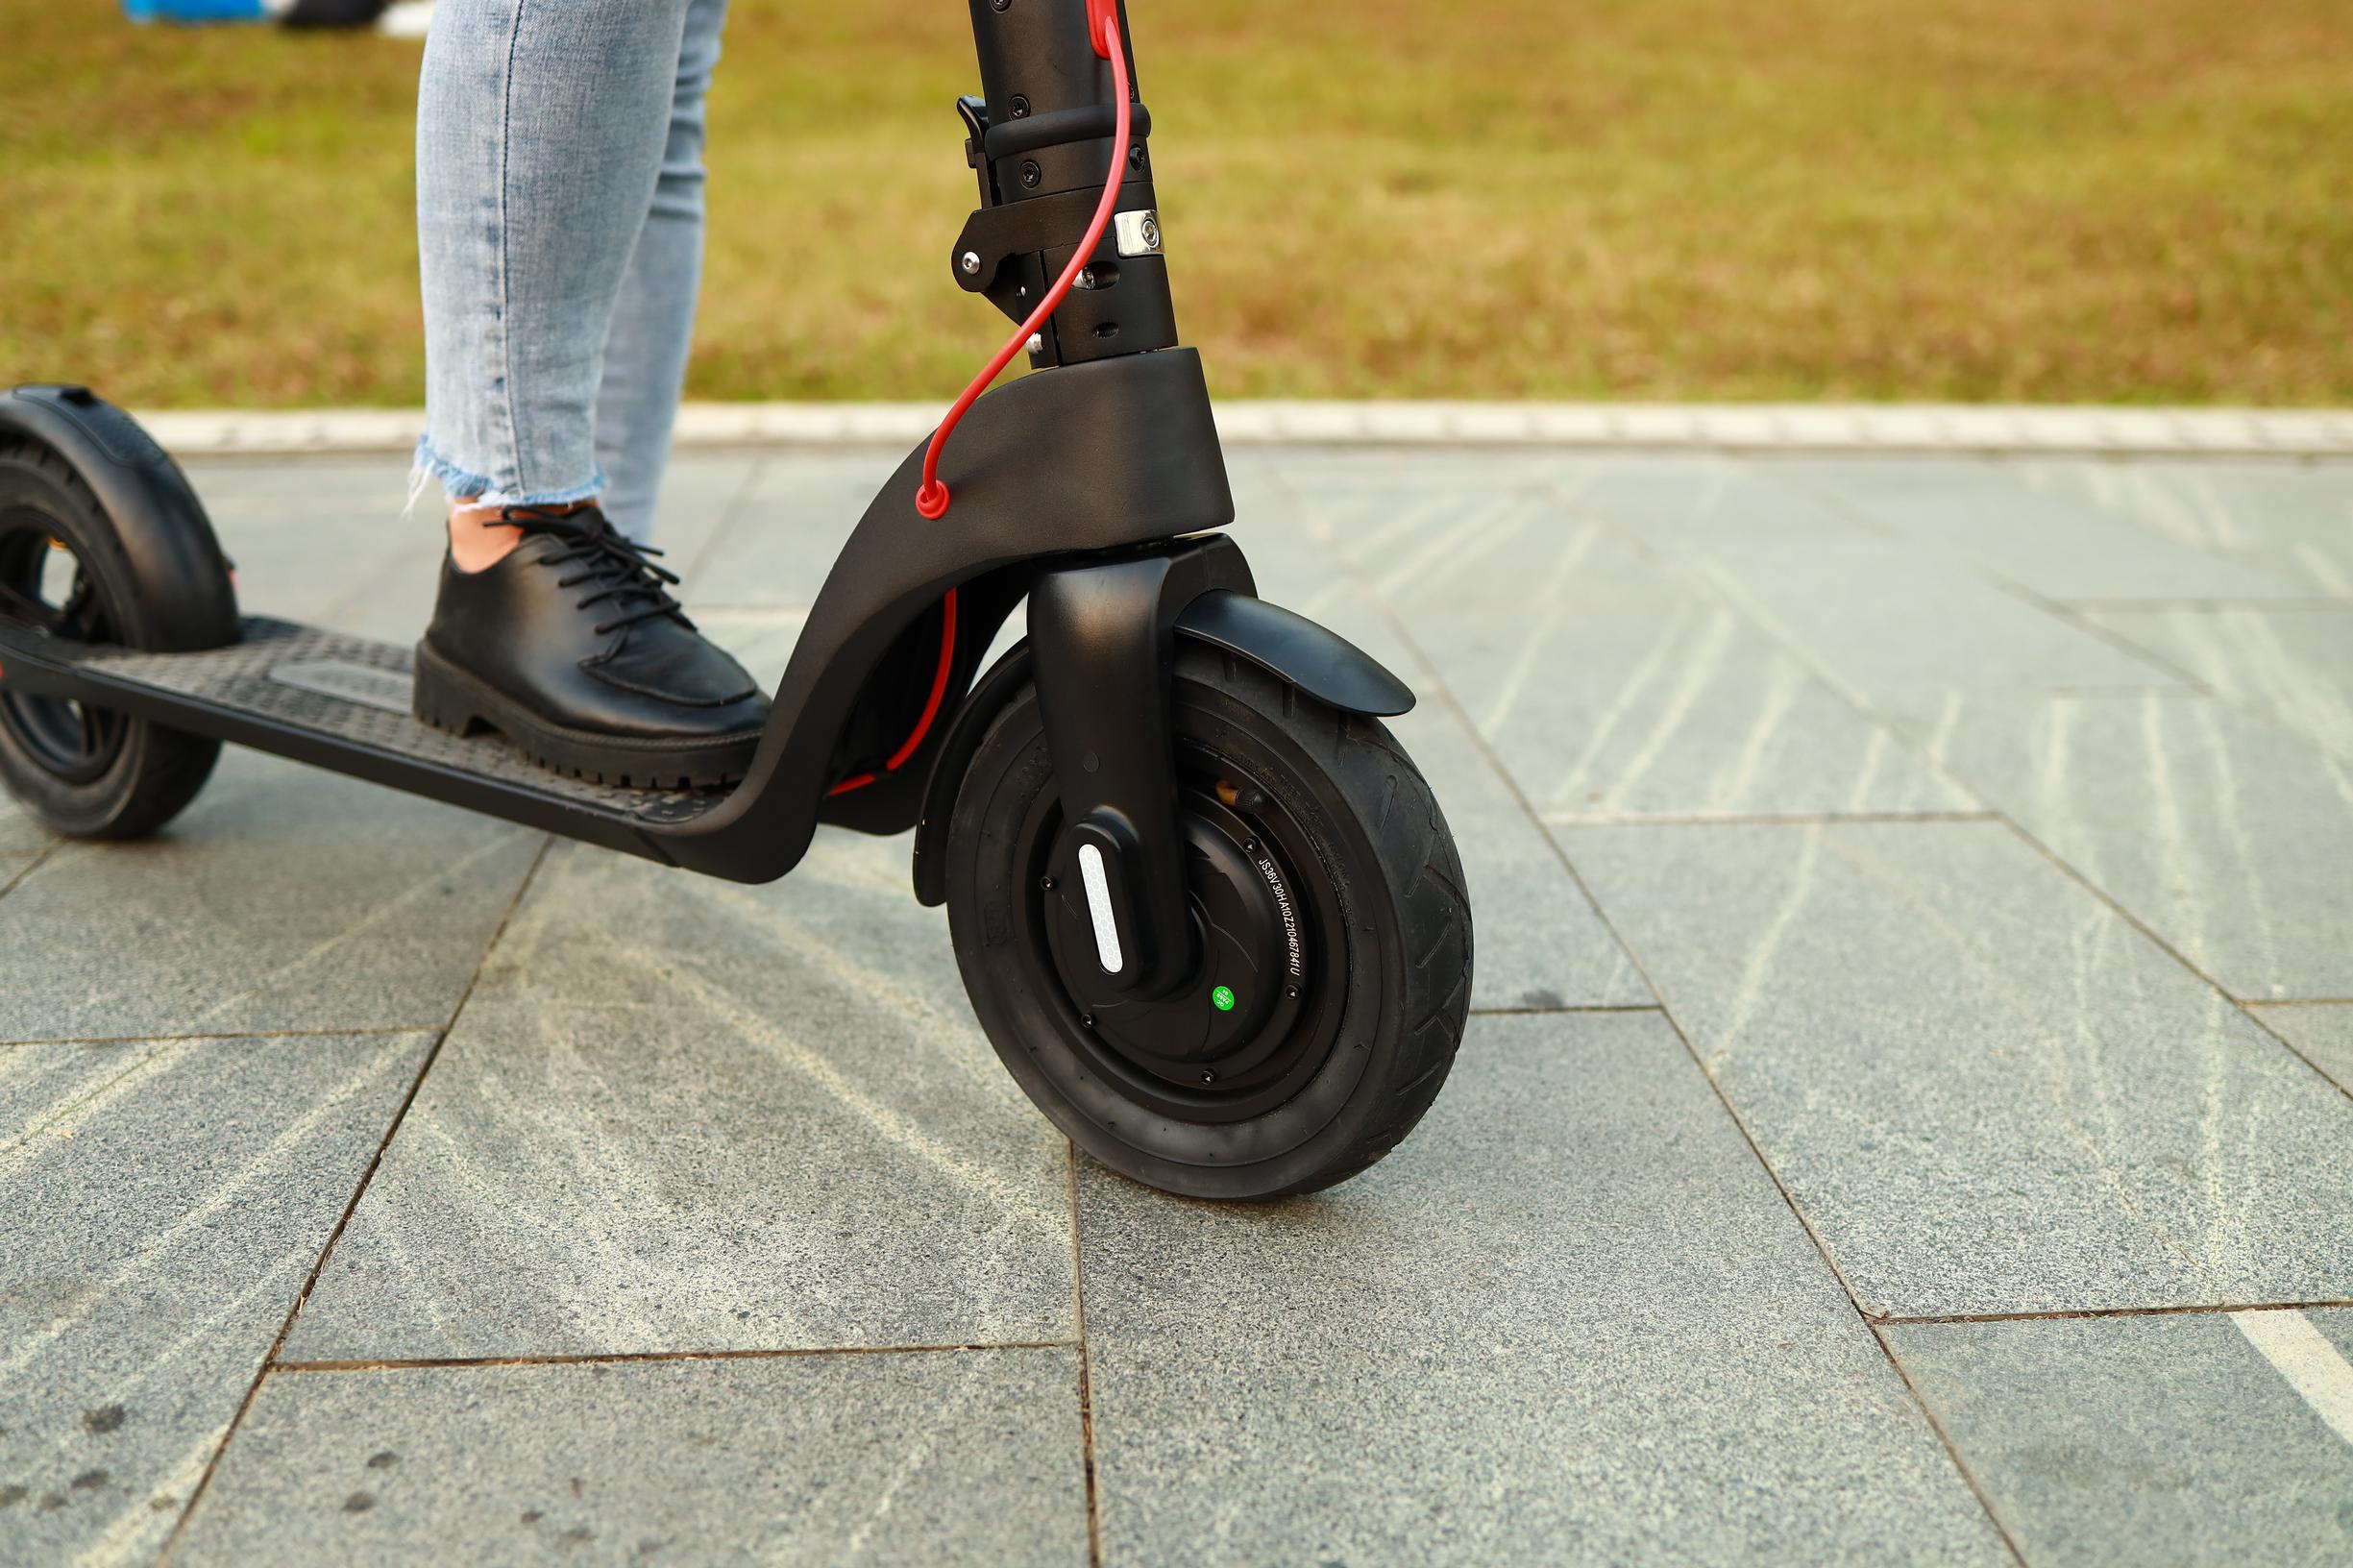 Electric scooters are classed as motor vehicles under the Road Traffic Act 1988